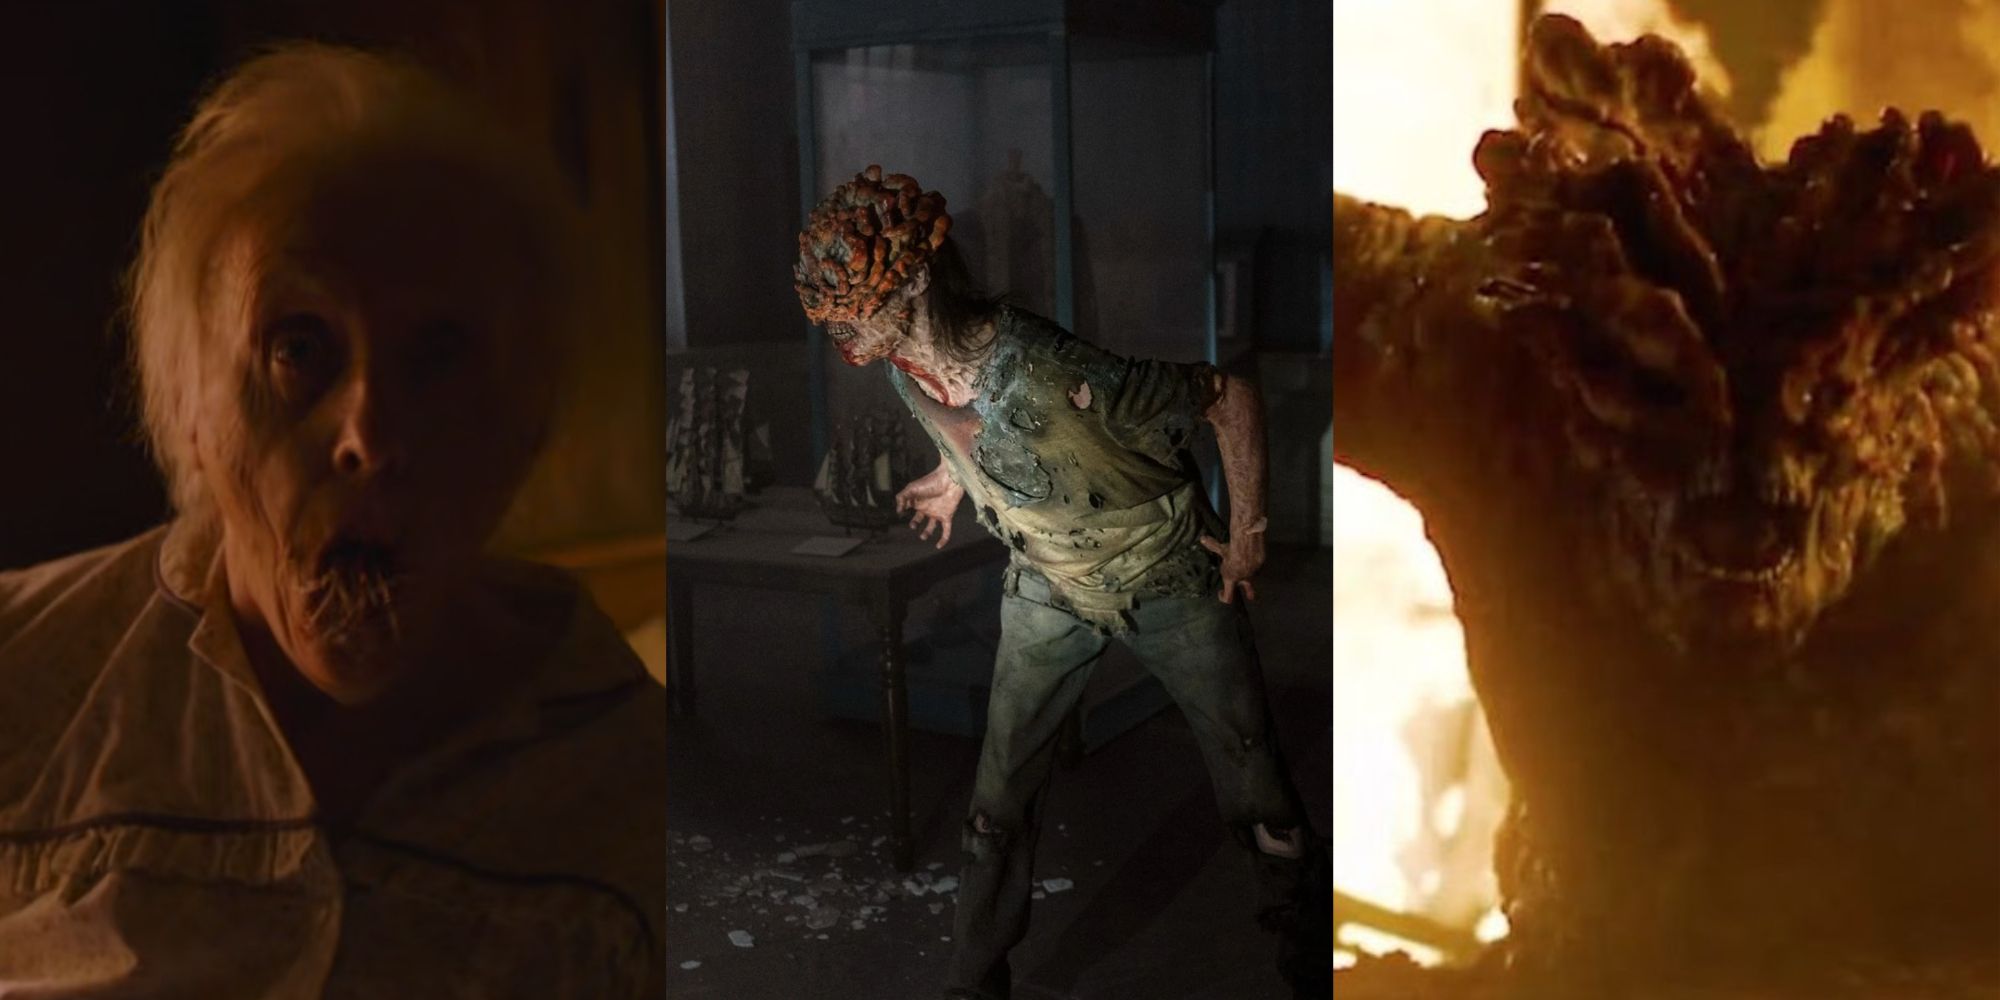 Main feature image showing the infected on HBO's The Last of Us.